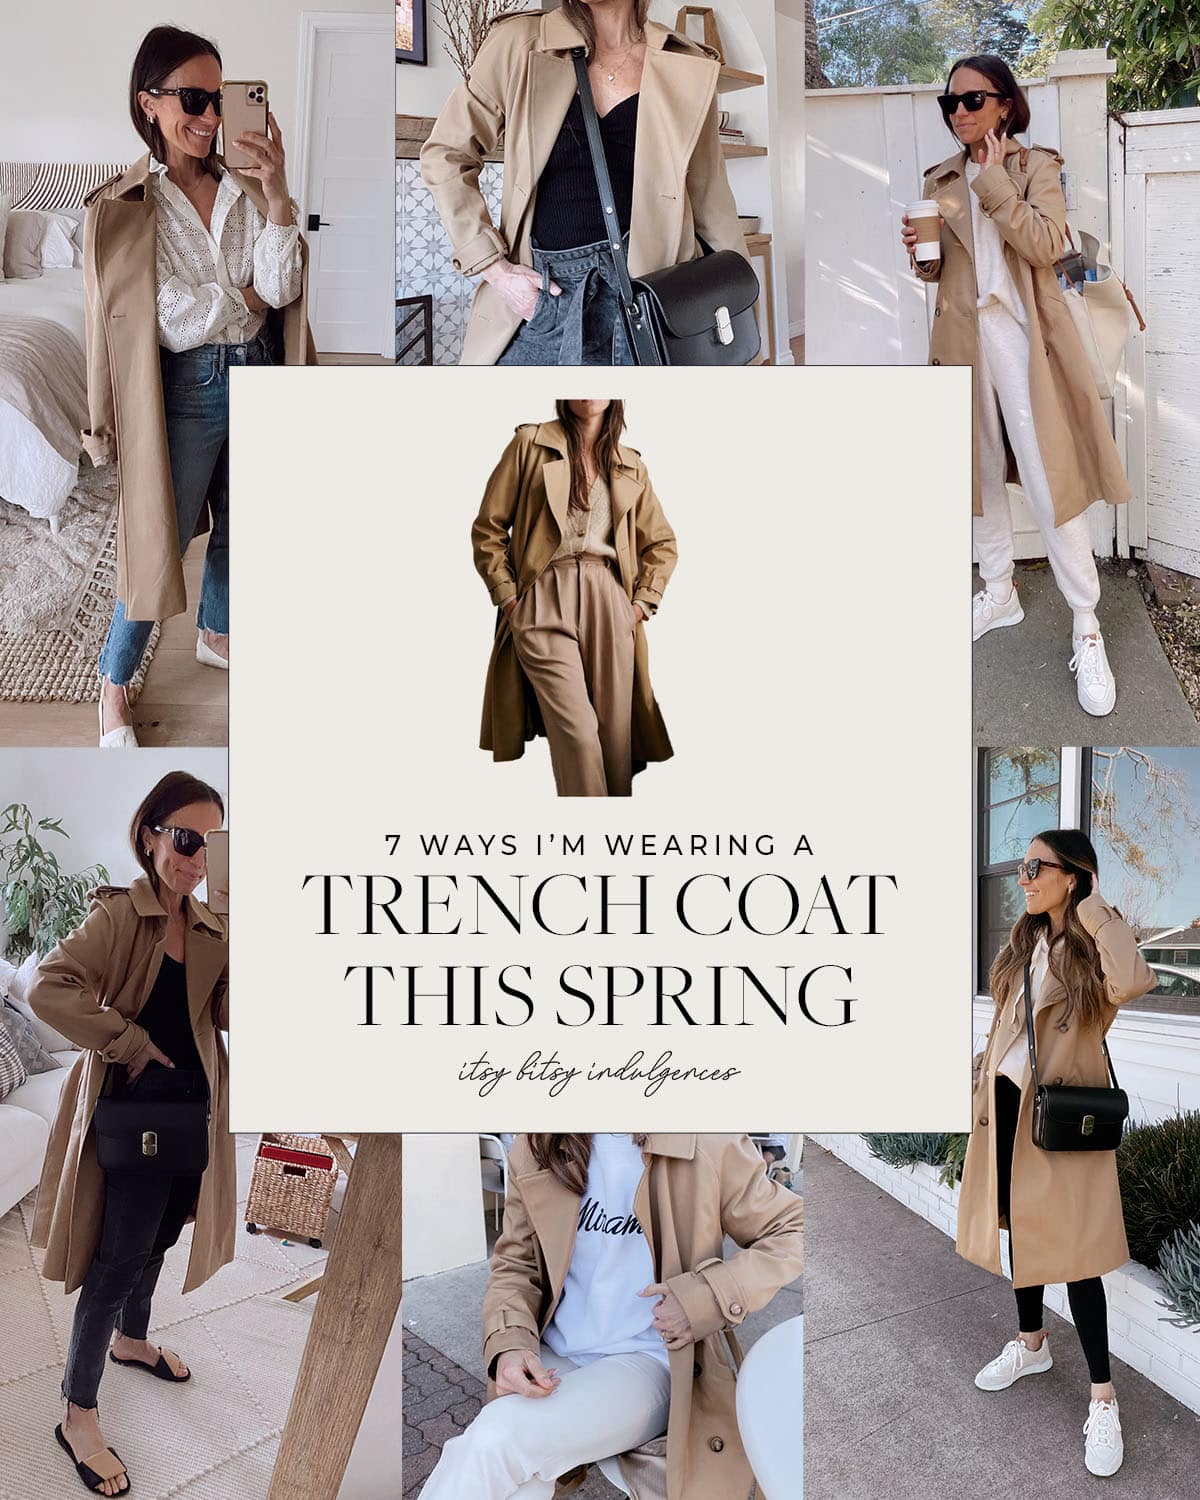 Itsy Bitsy Indulgenceseveryday Style A Trench Coat In The Spring Styled Ways